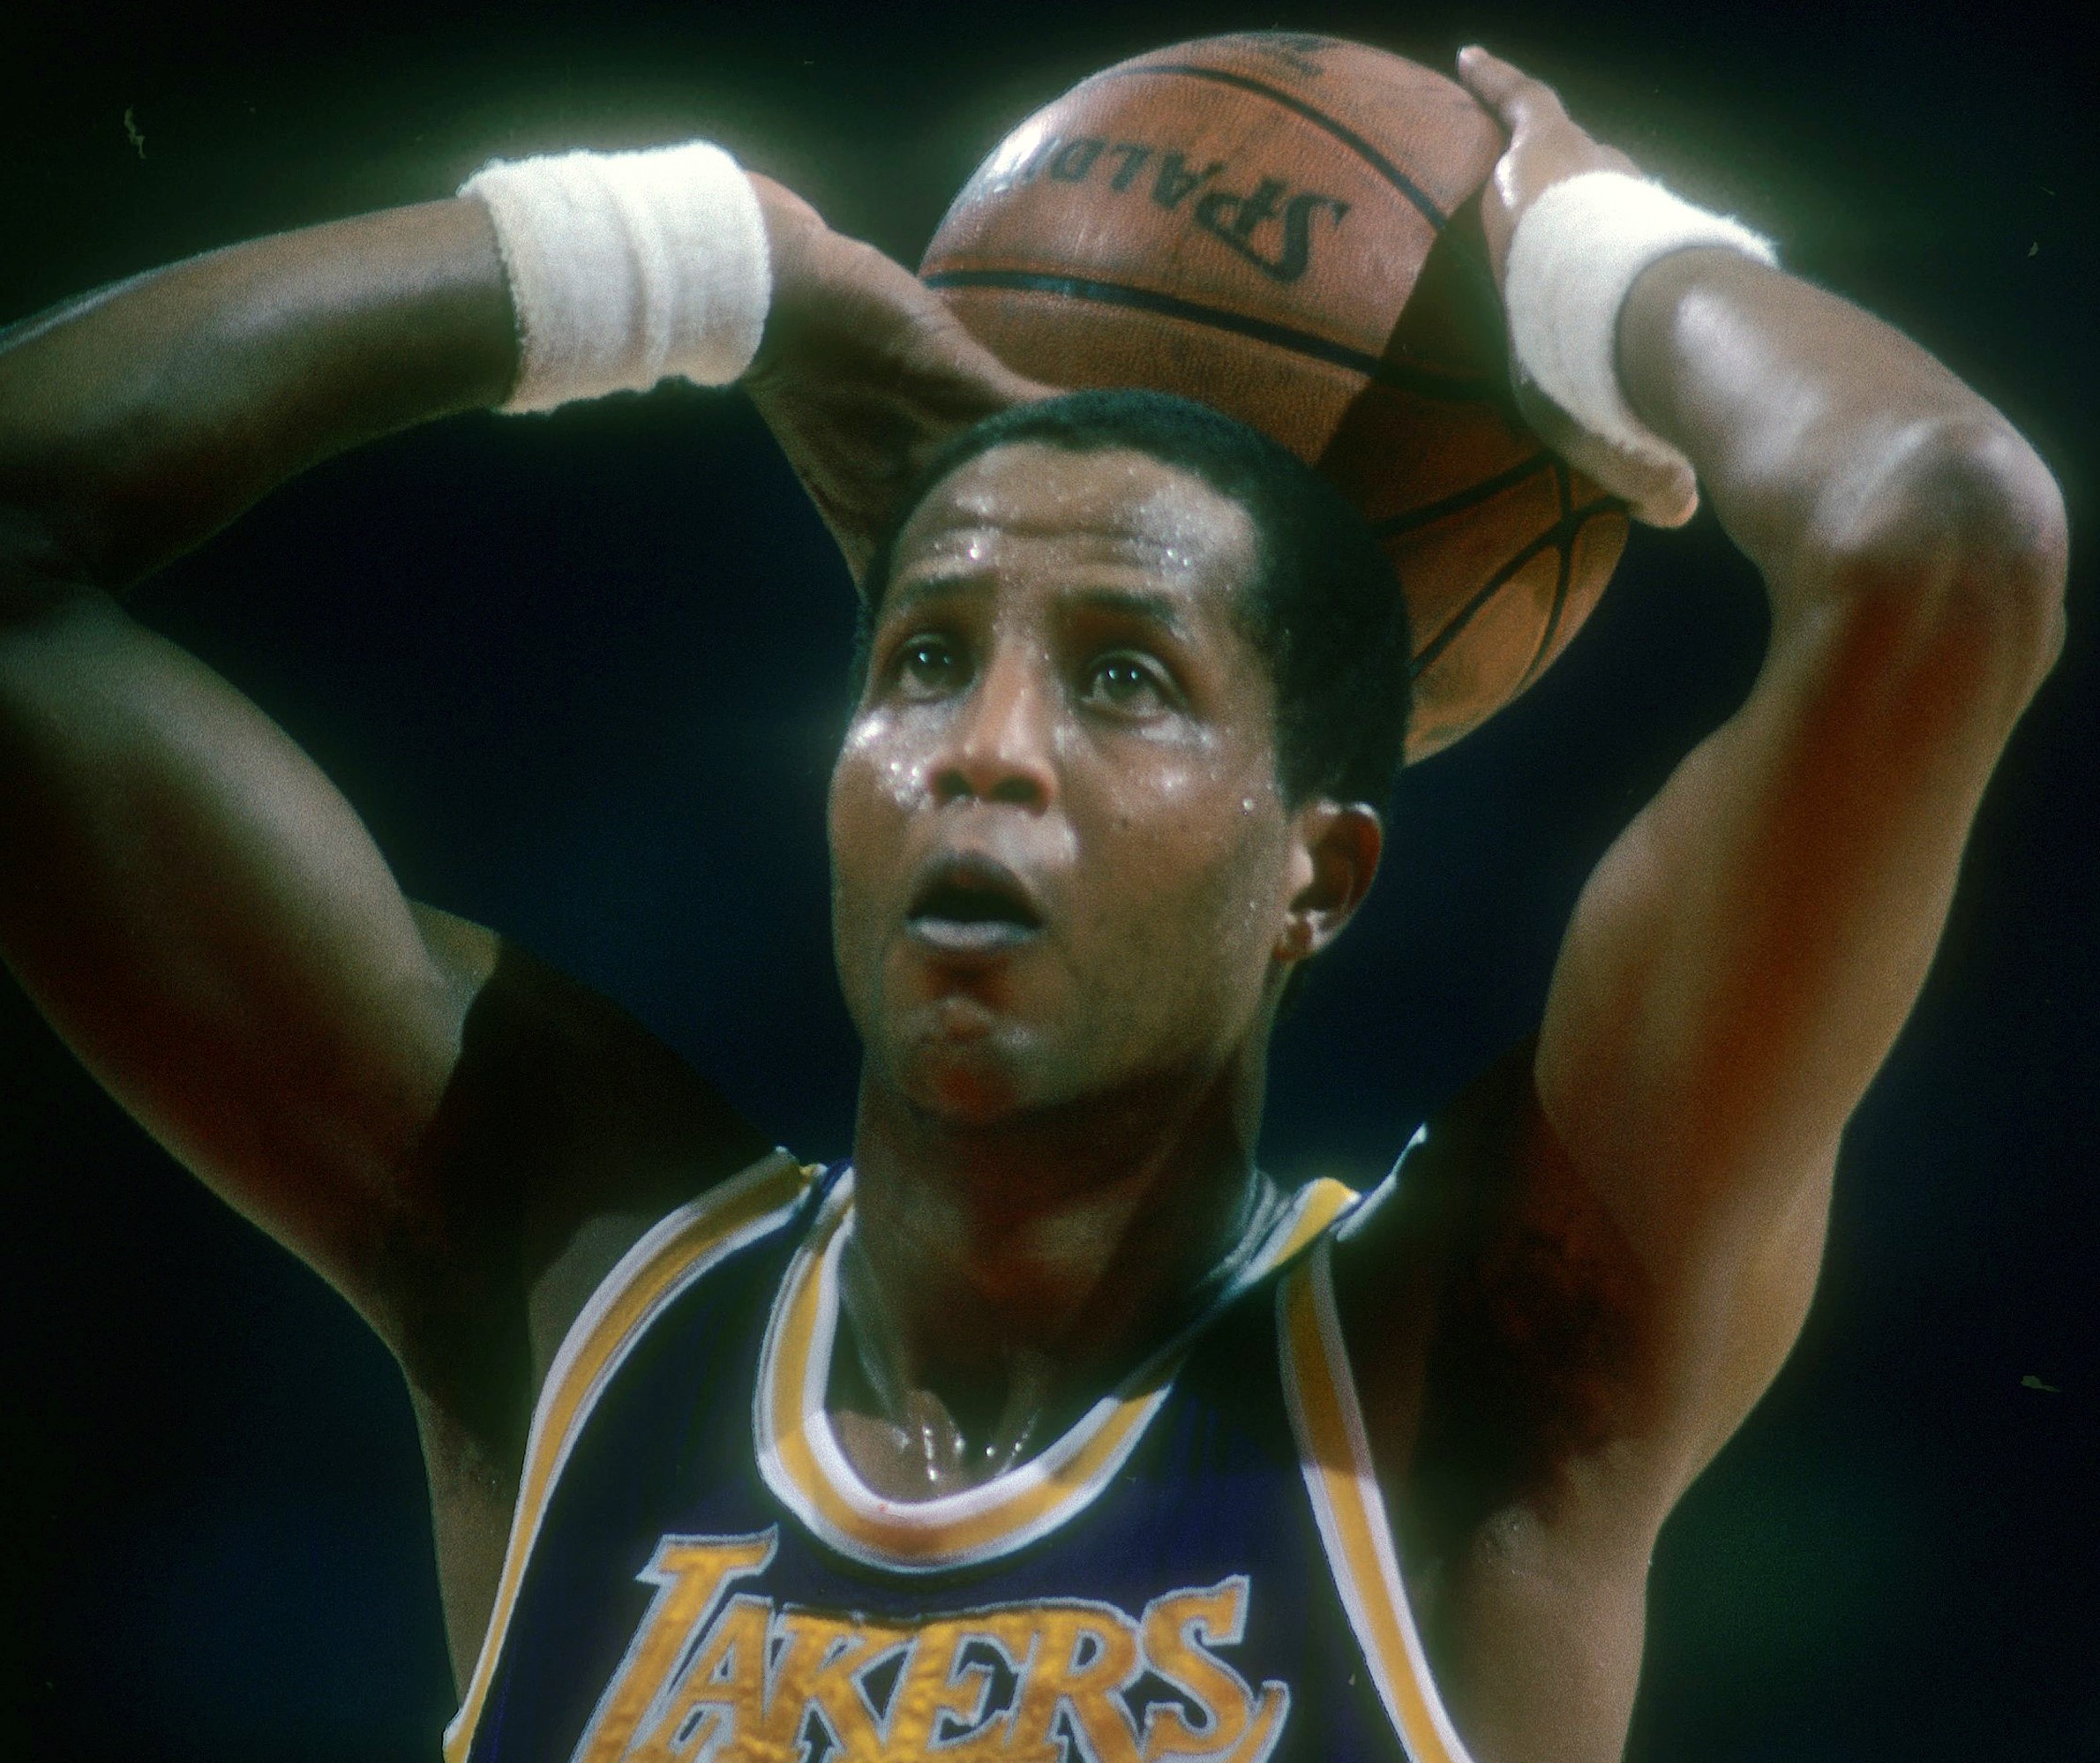 Jamaal Wilkes of the Los Angeles Lakers shoots the ball against the Washington Bullets during an NBA basketball game circa 1983.